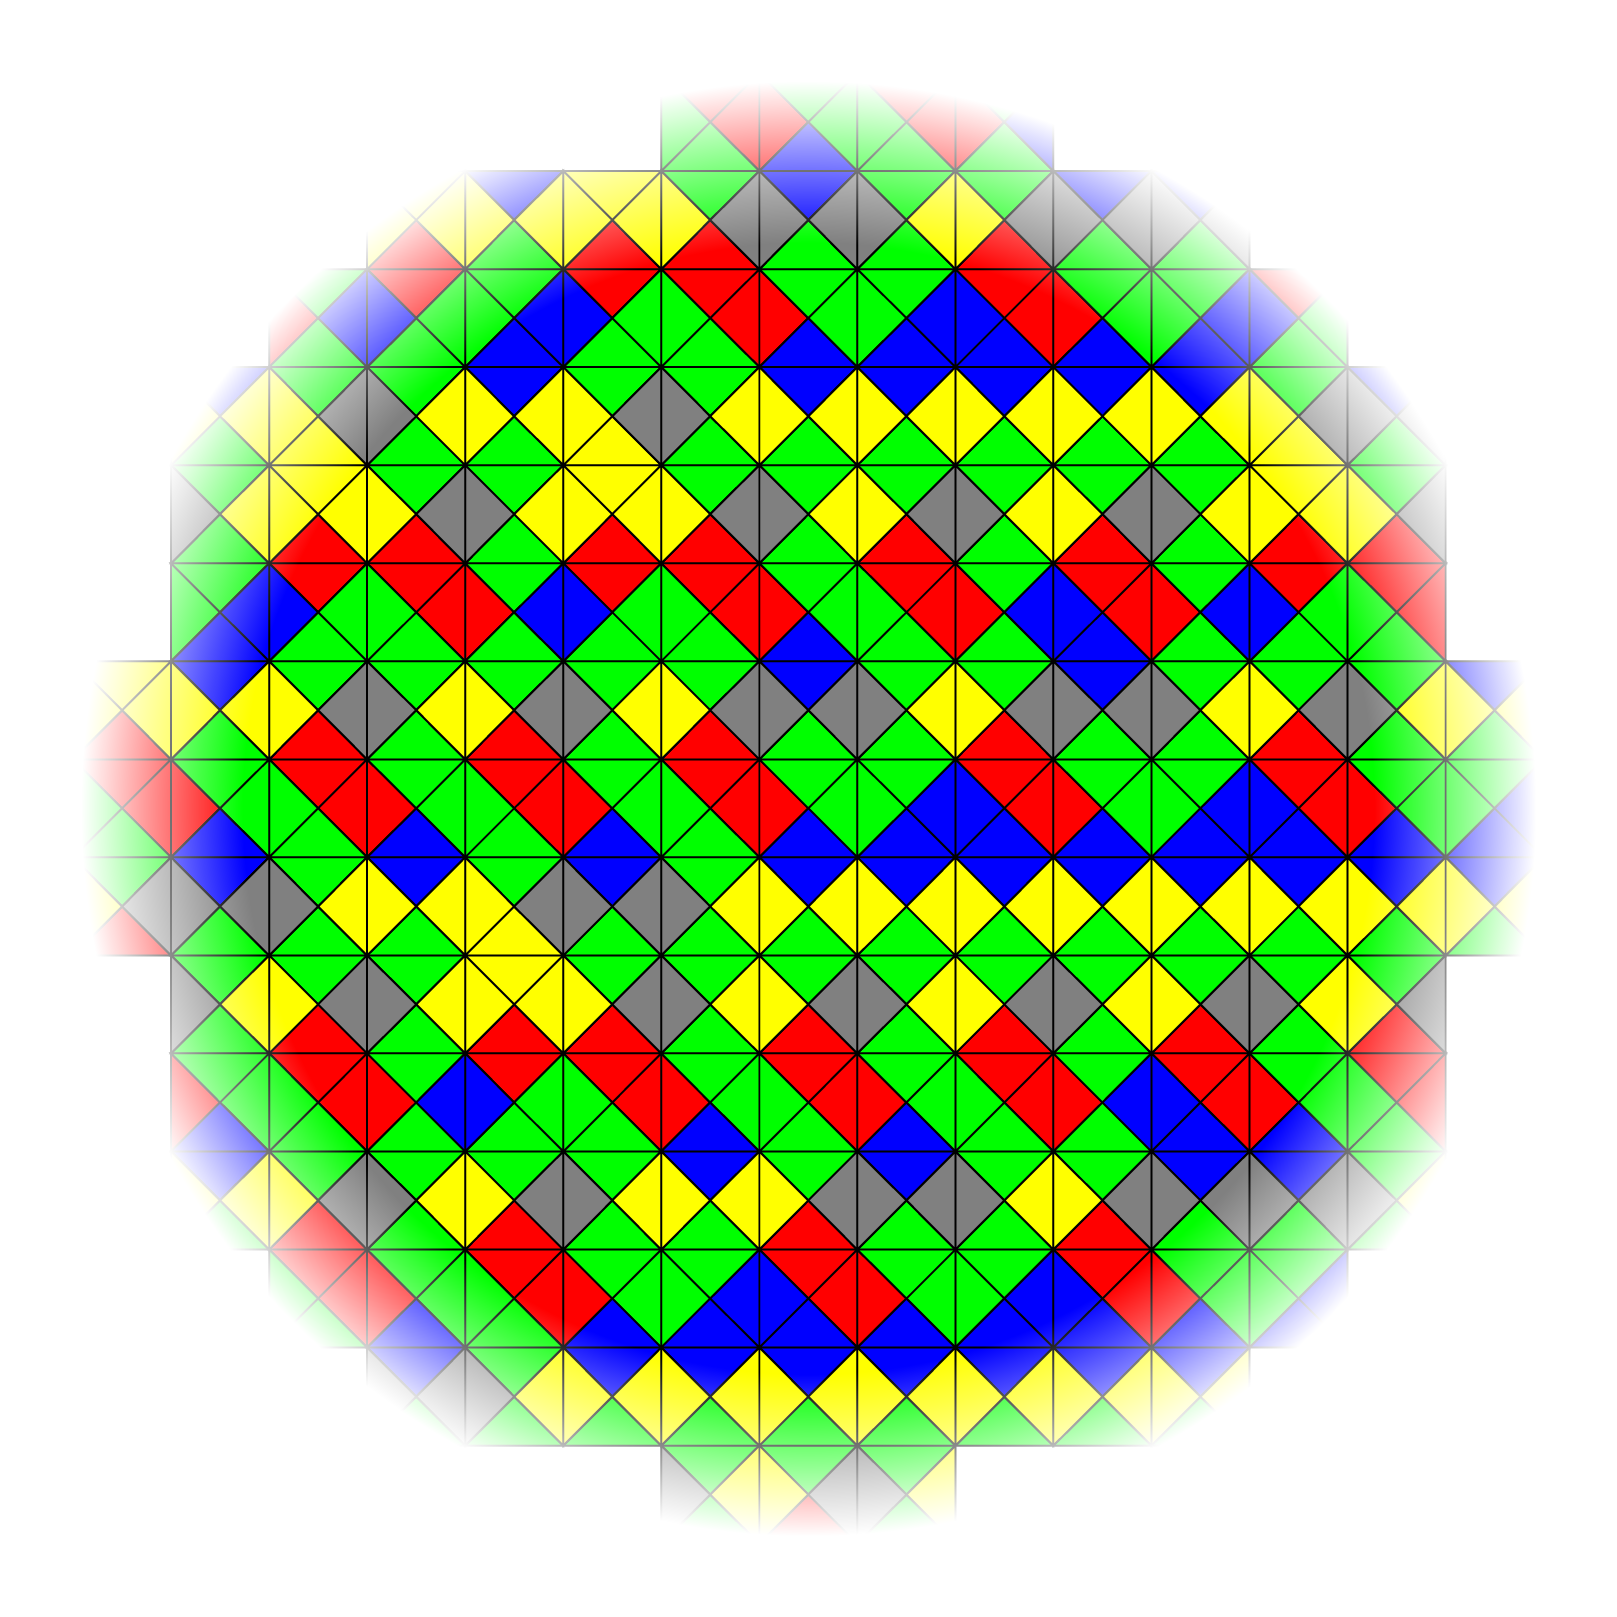 Researchers Discovered a New 13-Sided Shape